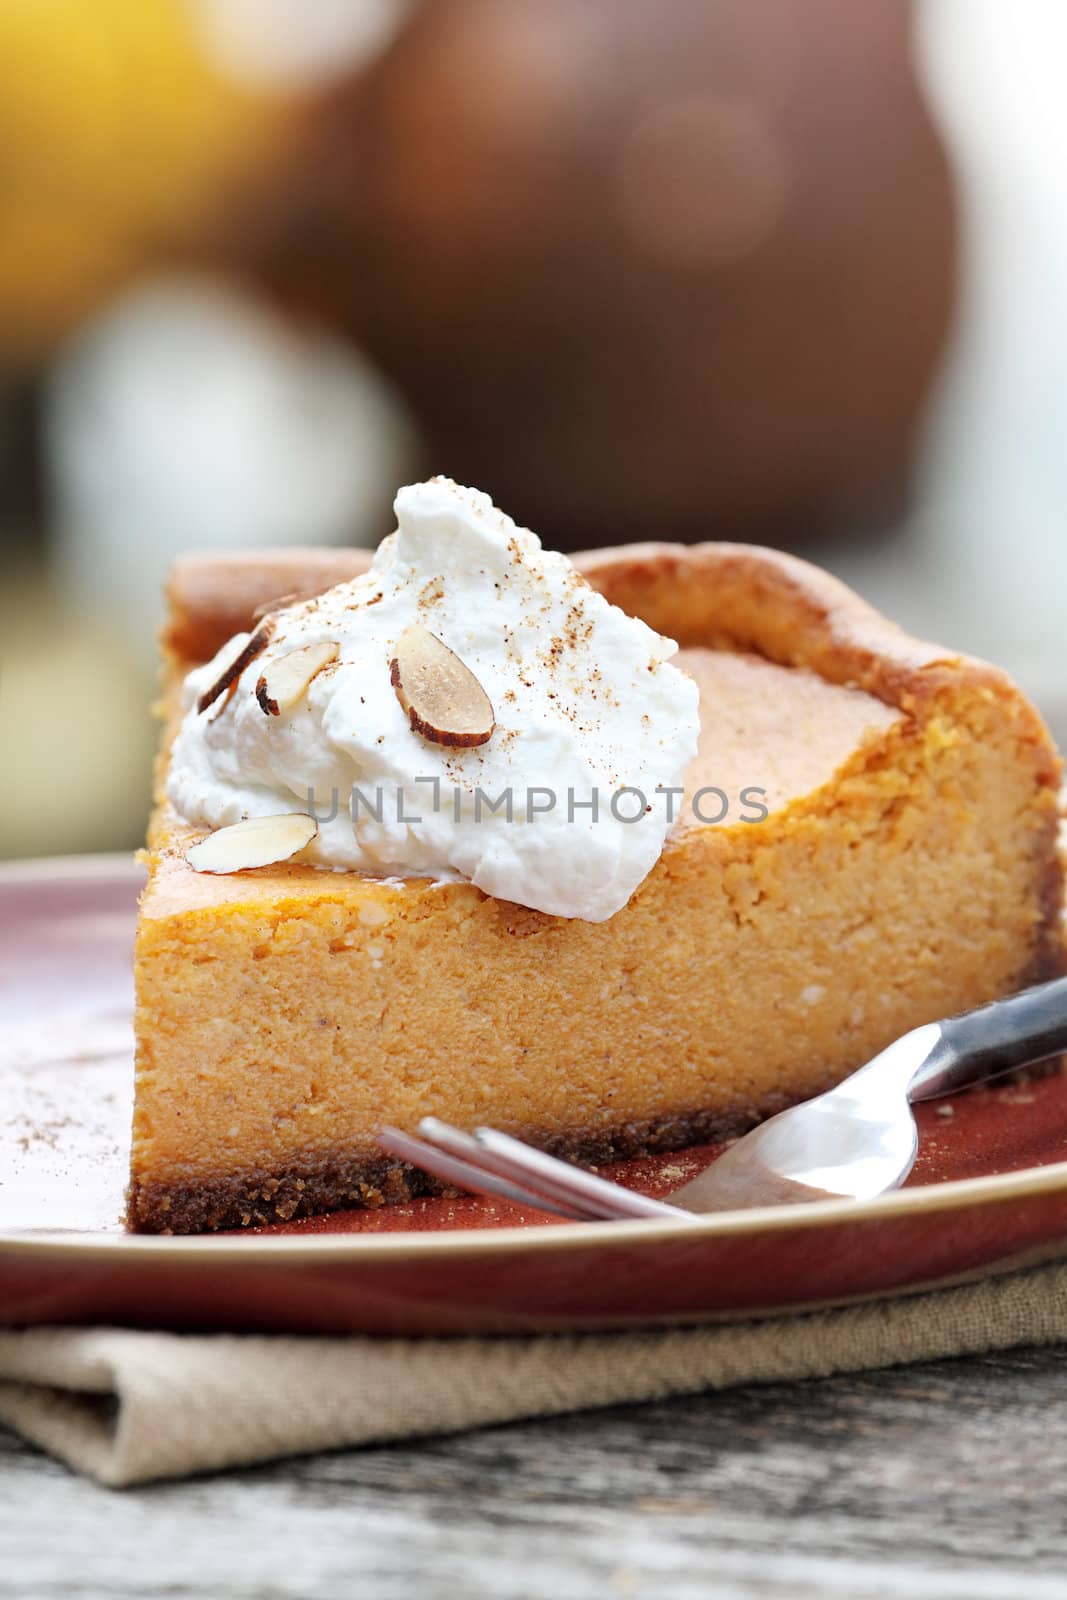  Pumpkin Cheesecake Pie with Whipped Cream by StephanieFrey